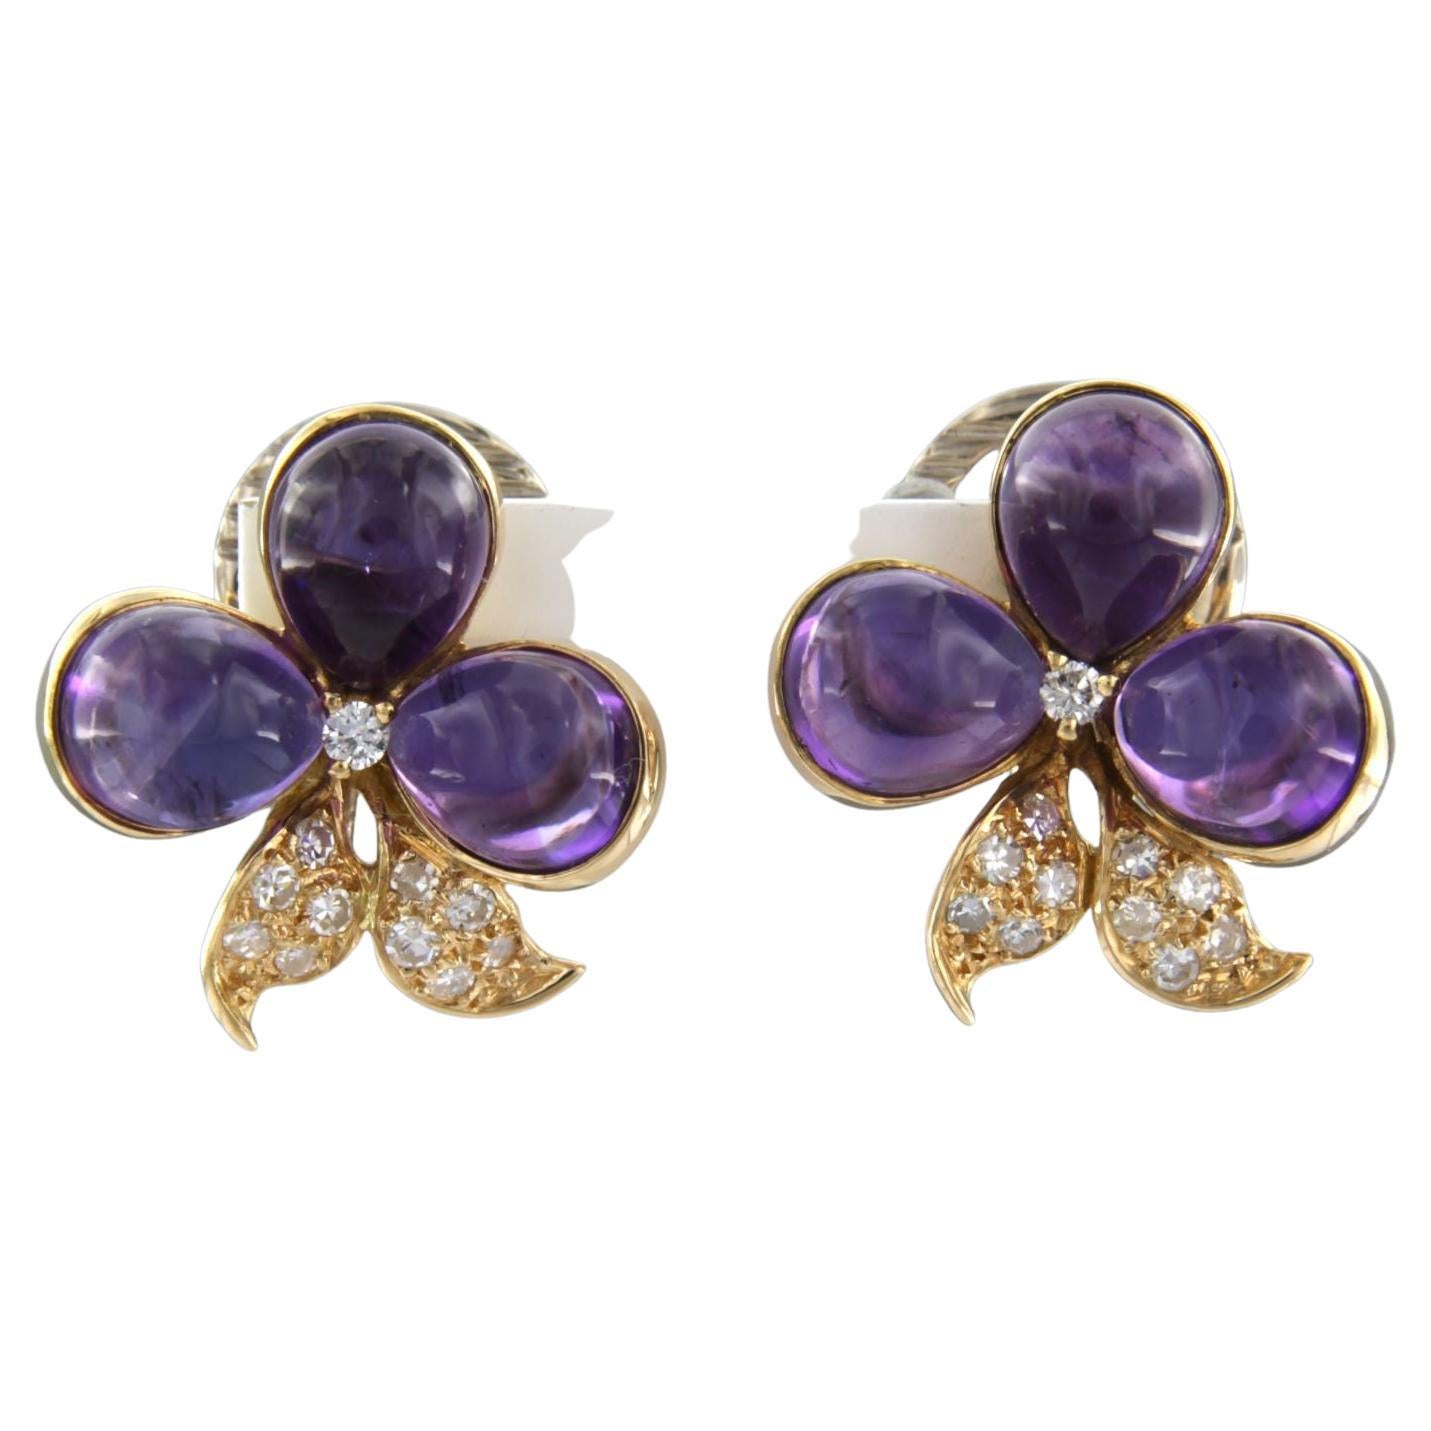 Earrings set with amethyst and diamonds 18k bicolour gold